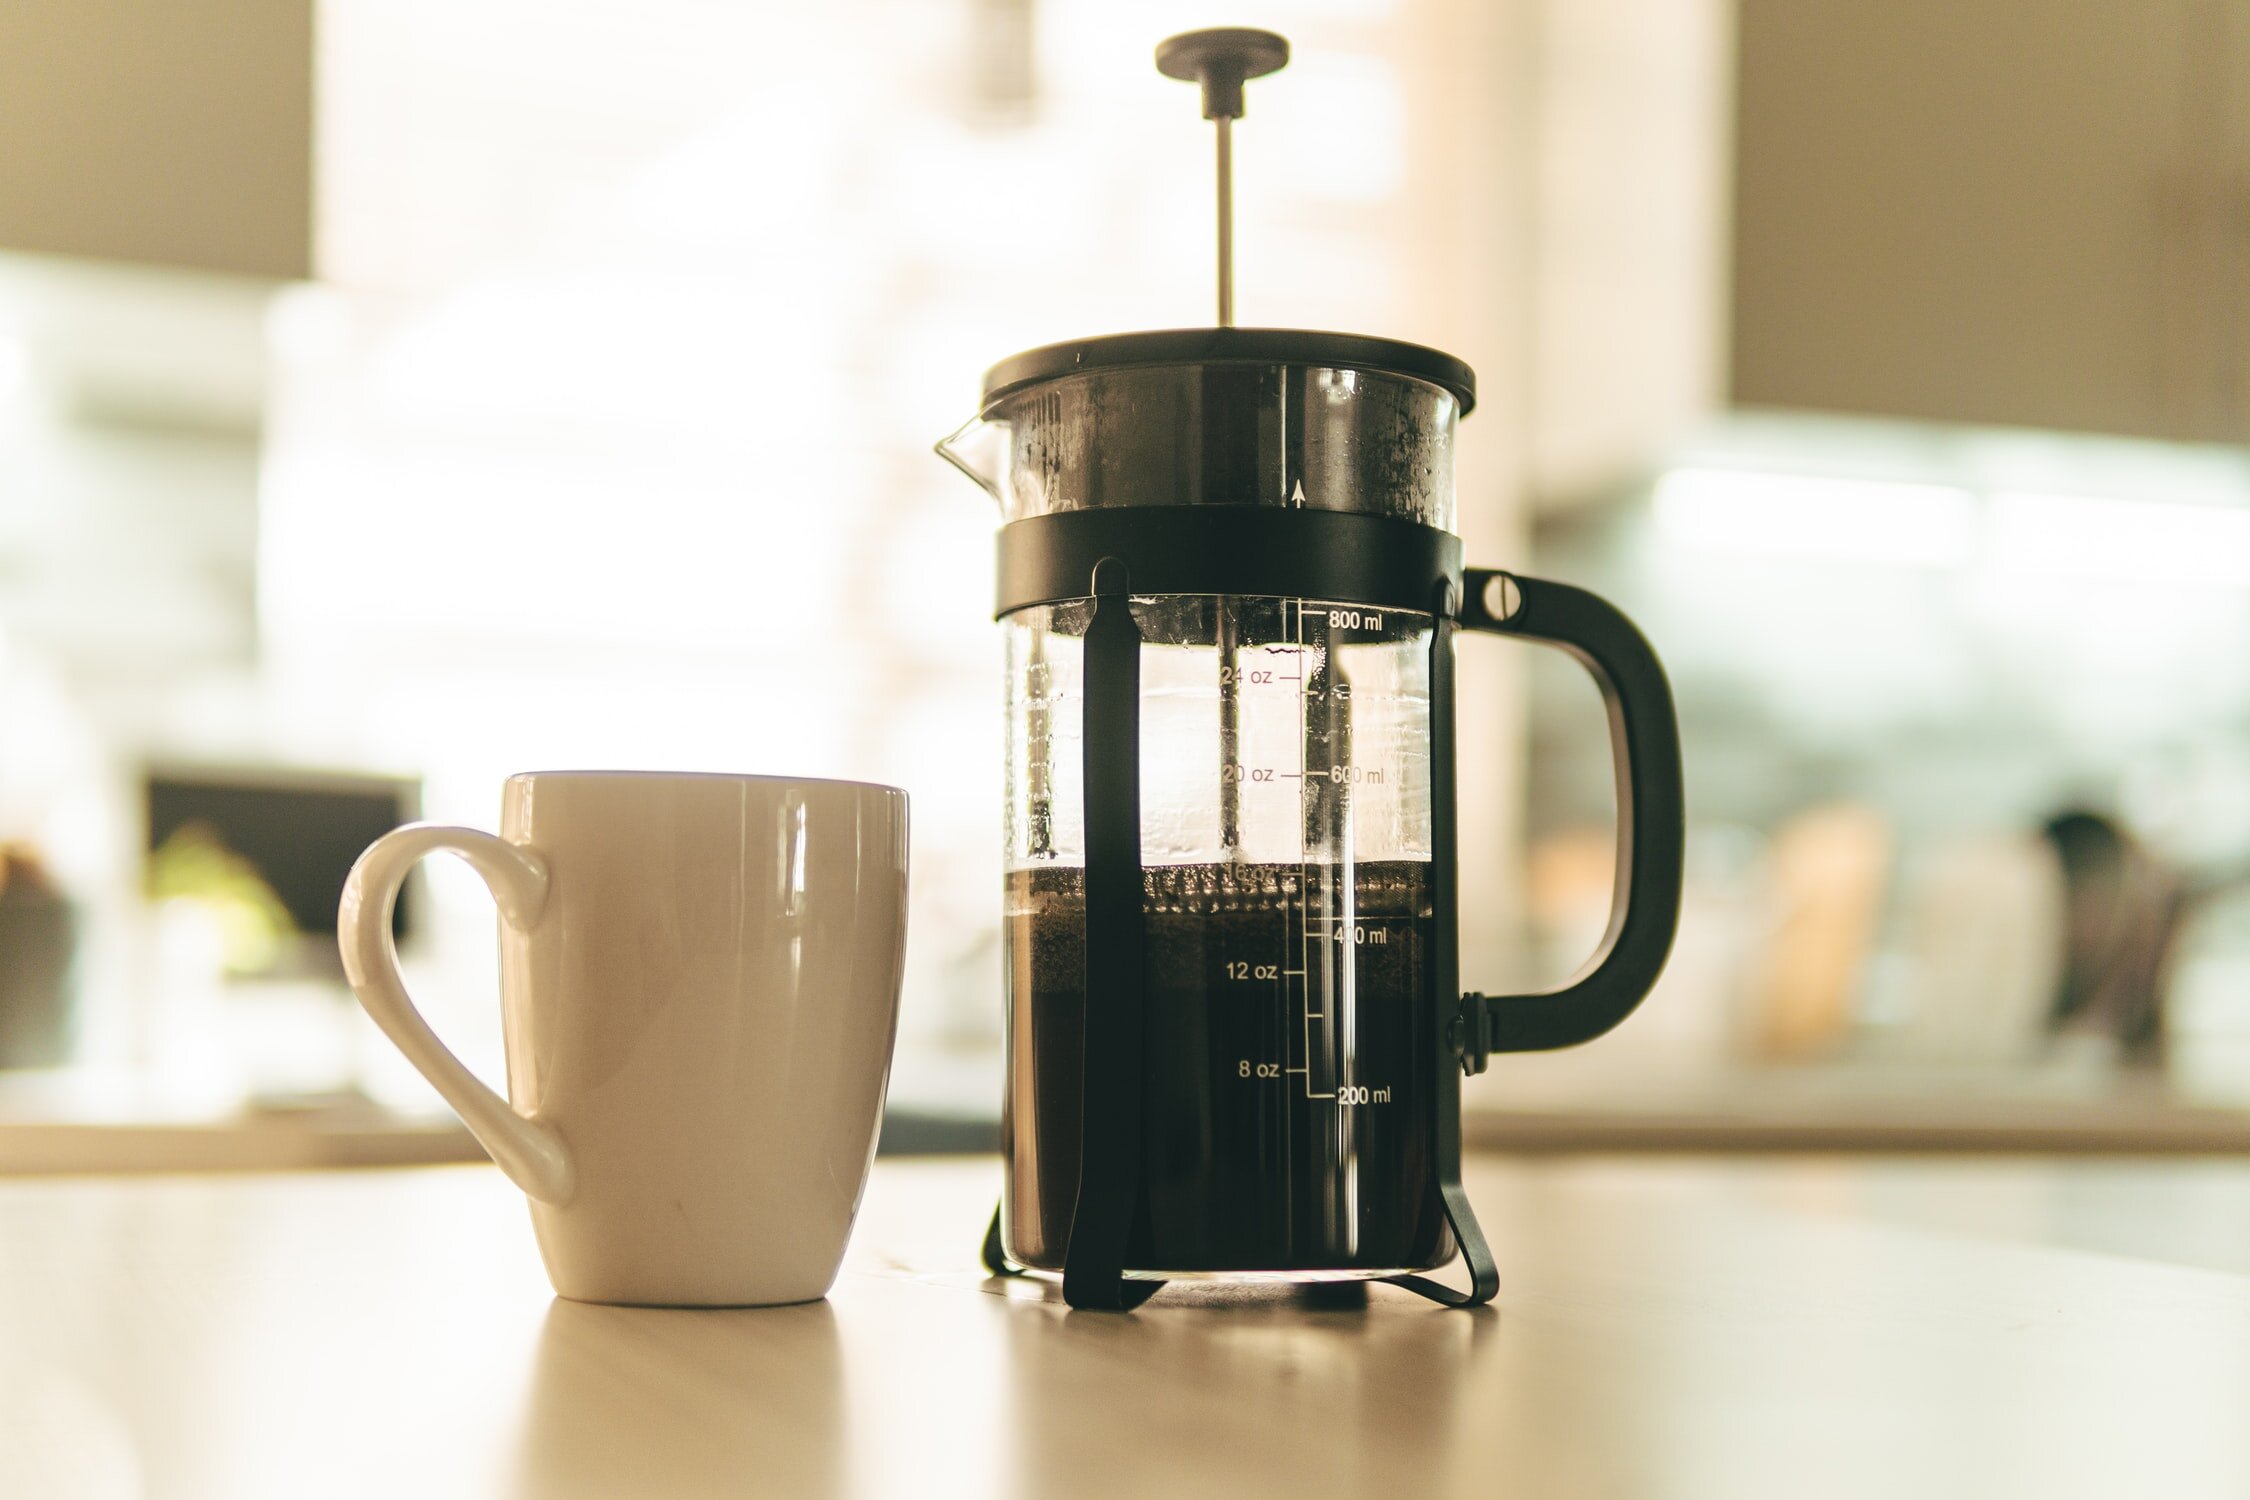 How to Use a French Press Coffee Maker - Step-by-Step Instructions